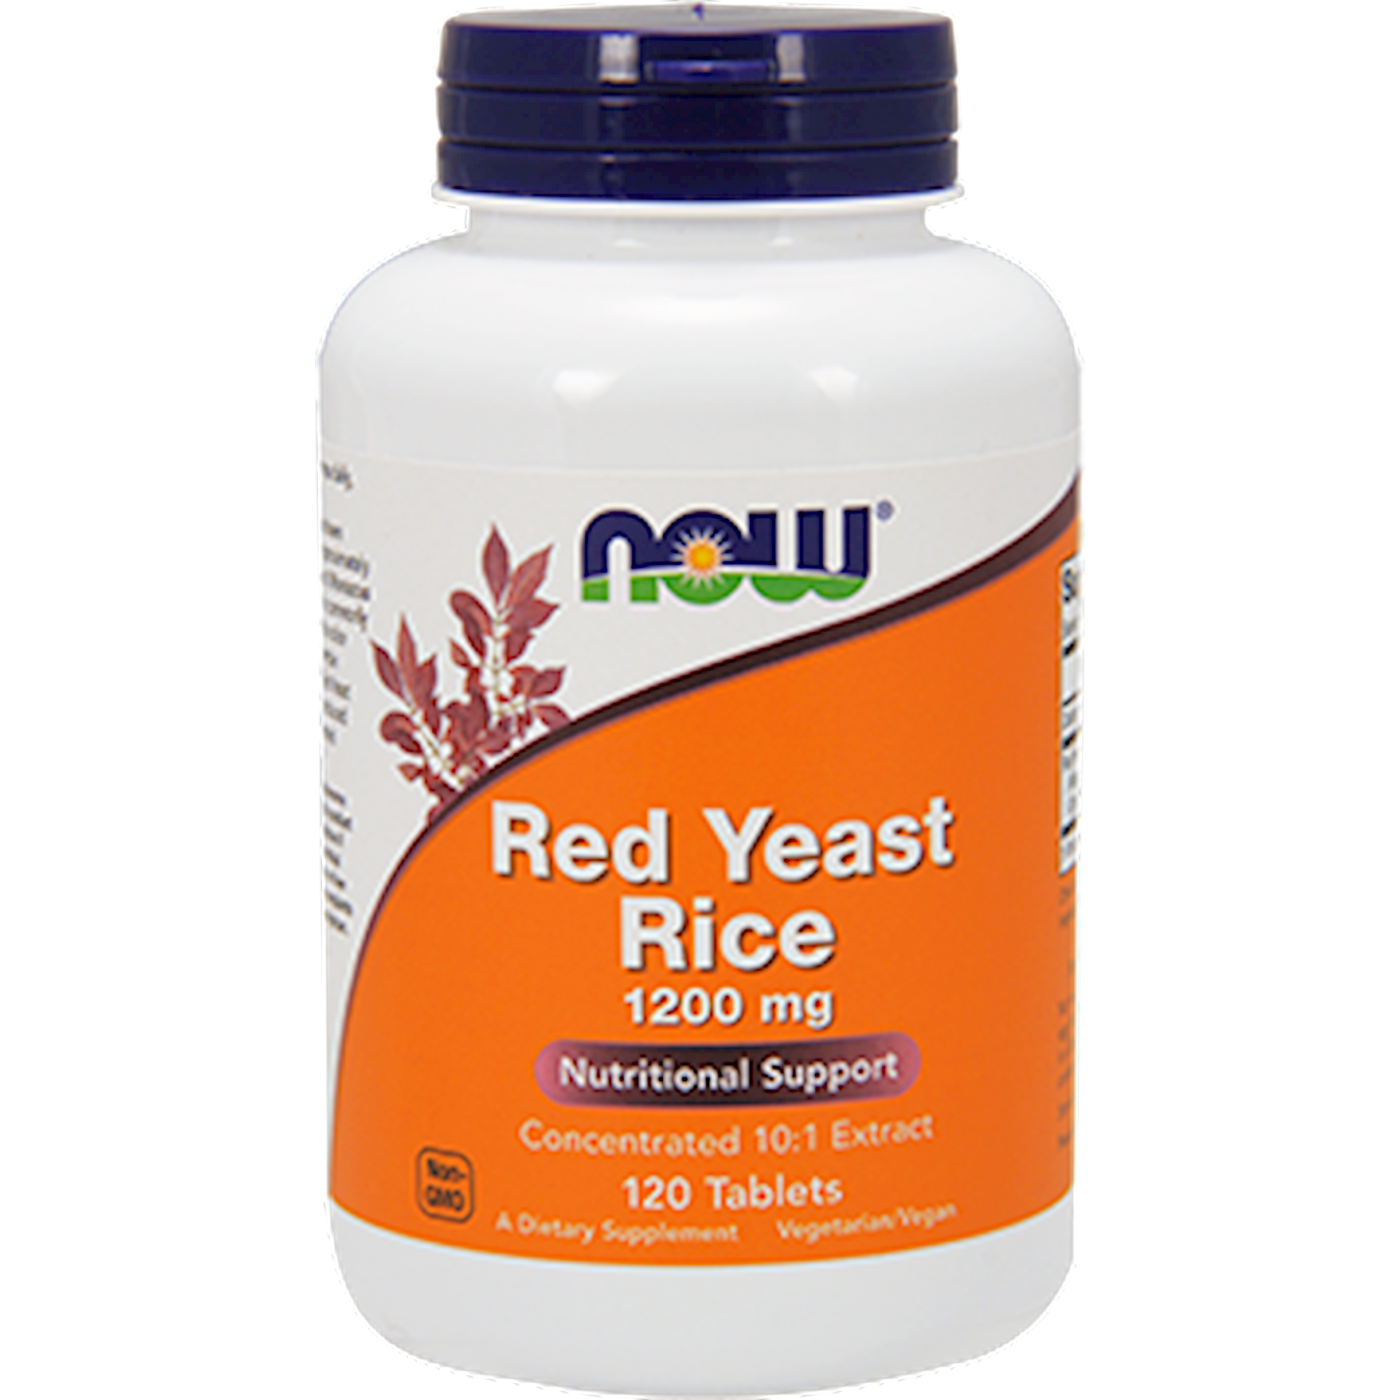 Red Yeast Rice 1200 mg 120 tabs Curated Wellness